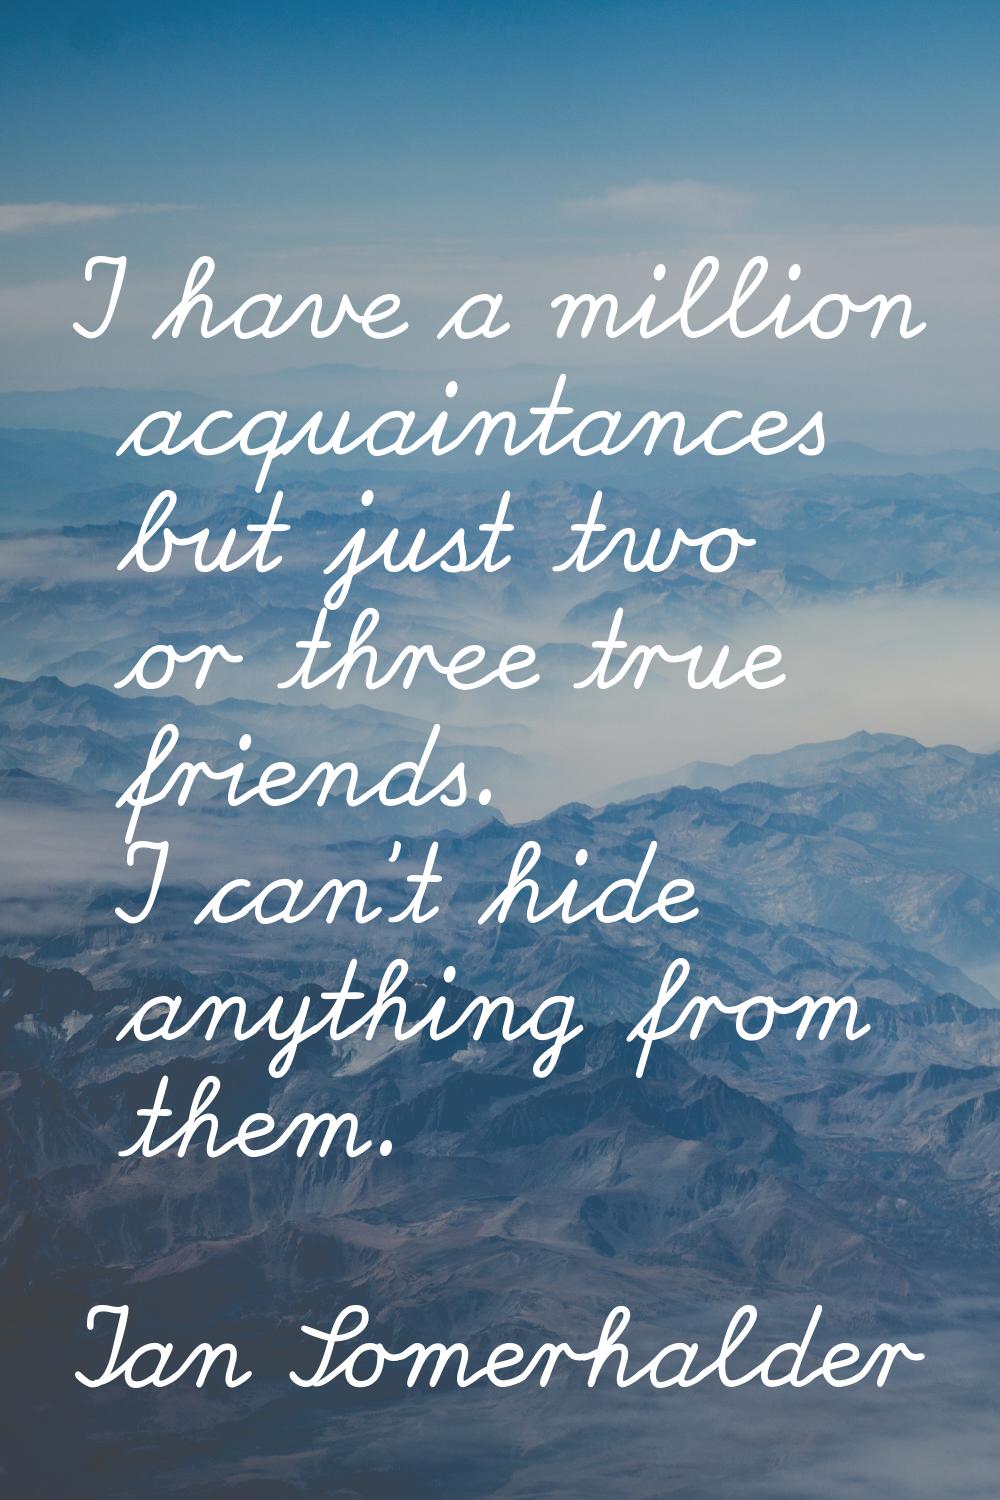 I have a million acquaintances but just two or three true friends. I can't hide anything from them.